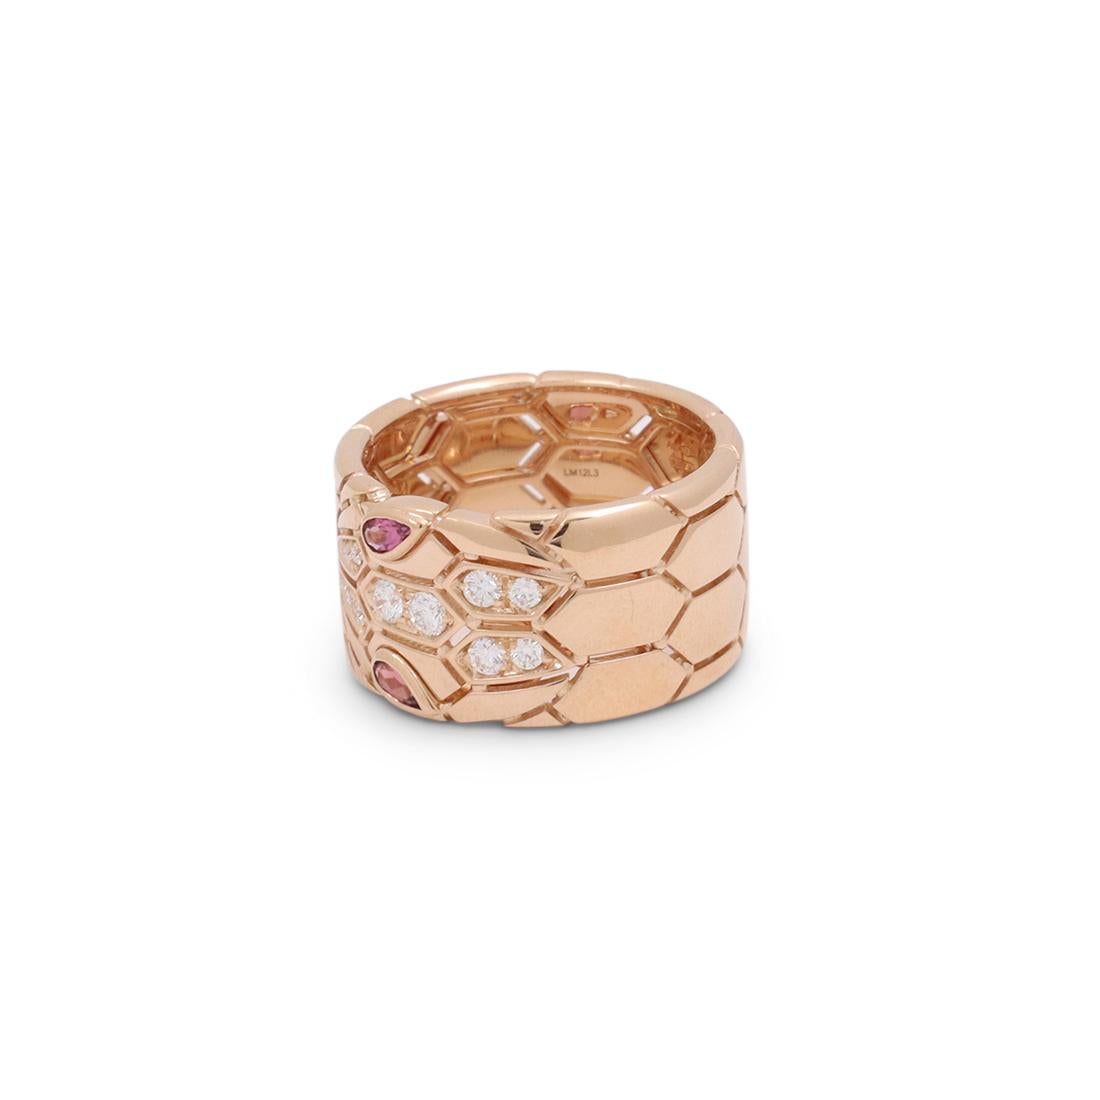 Authentic Bvlgari 'Serpenti Seduttori' ring crafted in 18 karat rose gold. A new take on the brand's iconic snake design, the wide band features a distinctive snakeskin pattern and snake head set with rubellite eyes. The ring is finished with 12